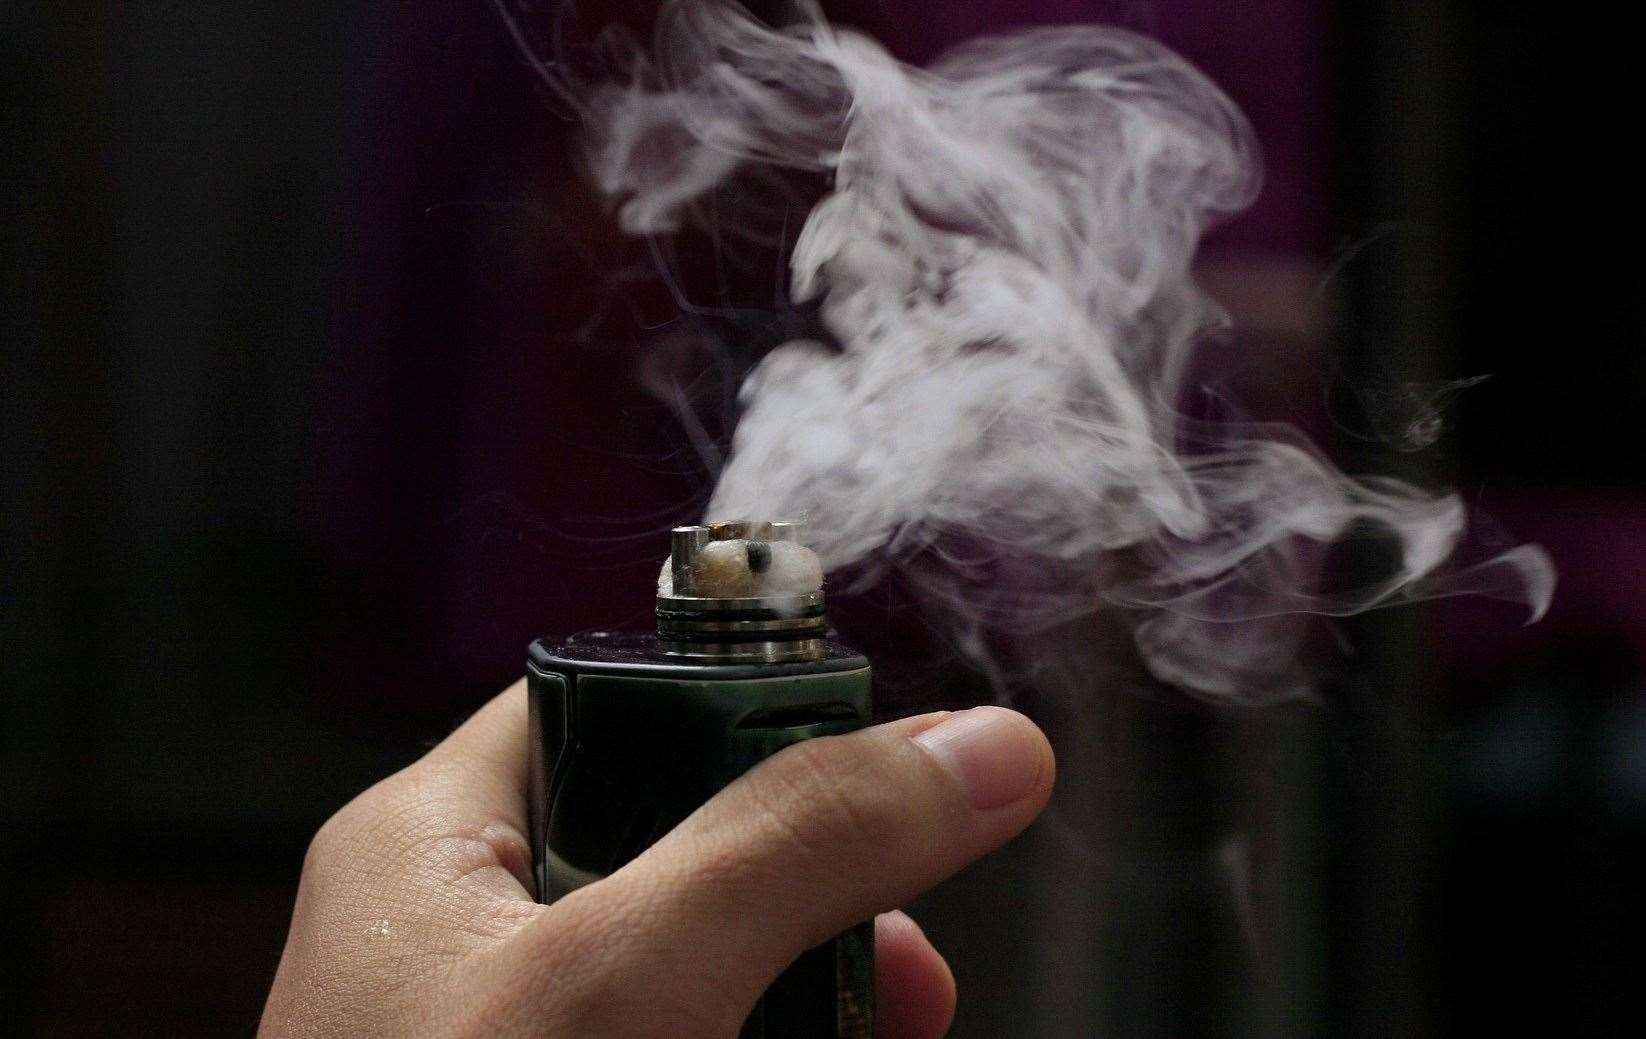 Vaping is becoming an epidemic among young people.